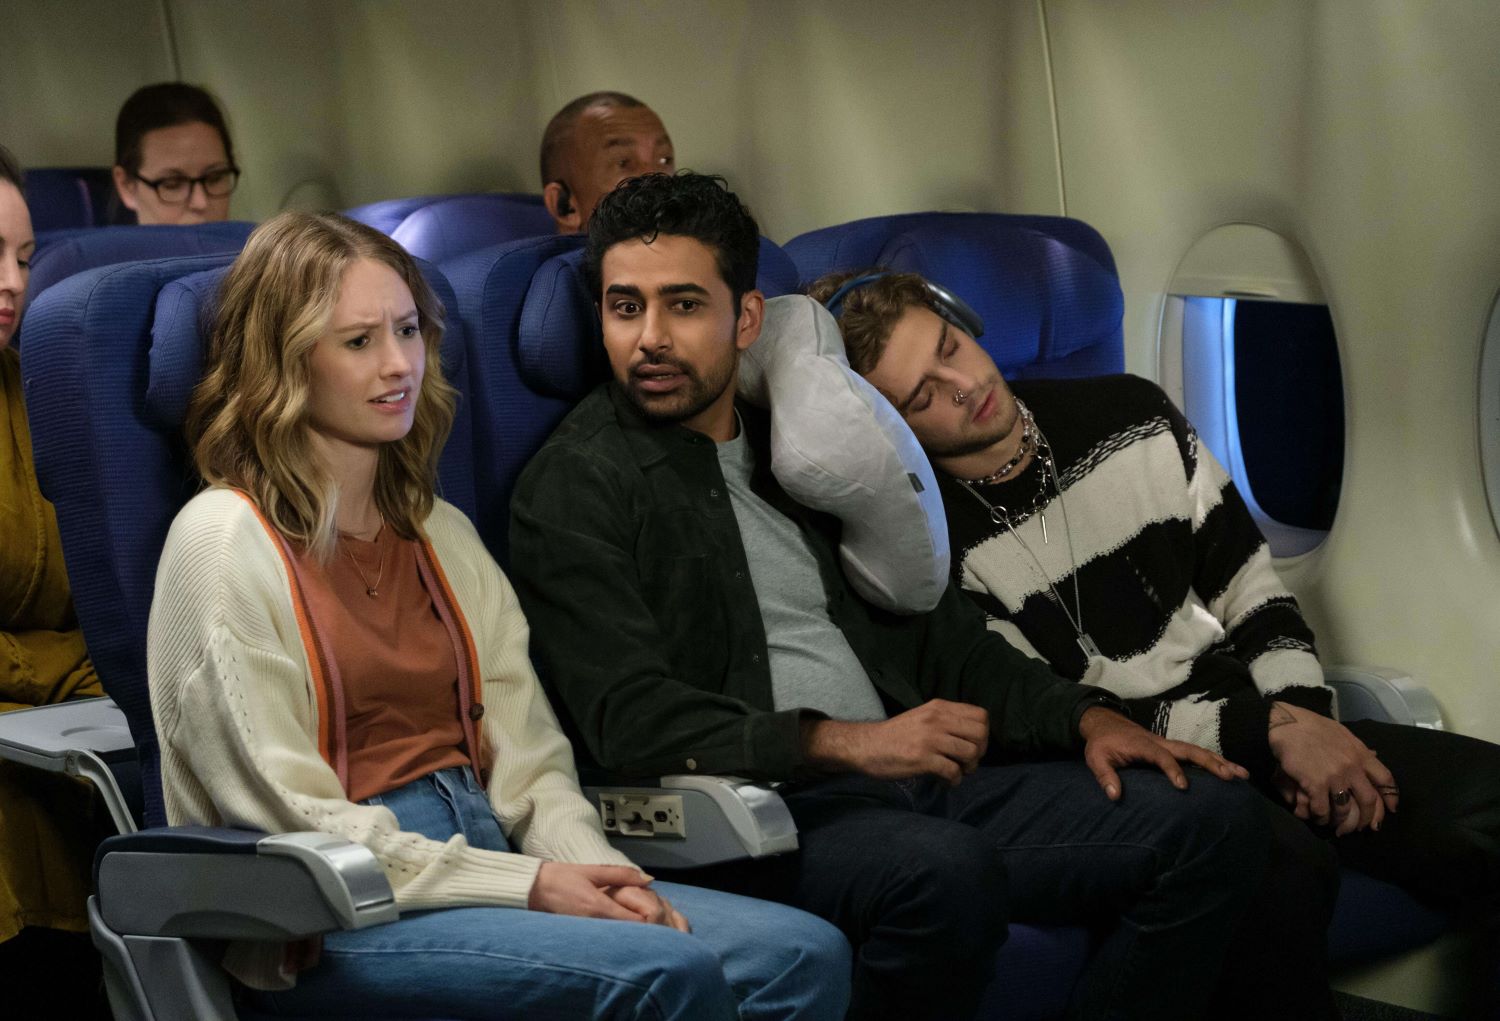 Caitlin Thompson as Taylor and Suraj Sharma as Sid sit next to one another on a plane in 'How I Met Your Father' Season 2 Episode 11, 'Daddy.' Taylor wears a white cardigan over a dark orange shirt and jeans. Sid wear a black button-up shirt over a light gray shirt and black pants.